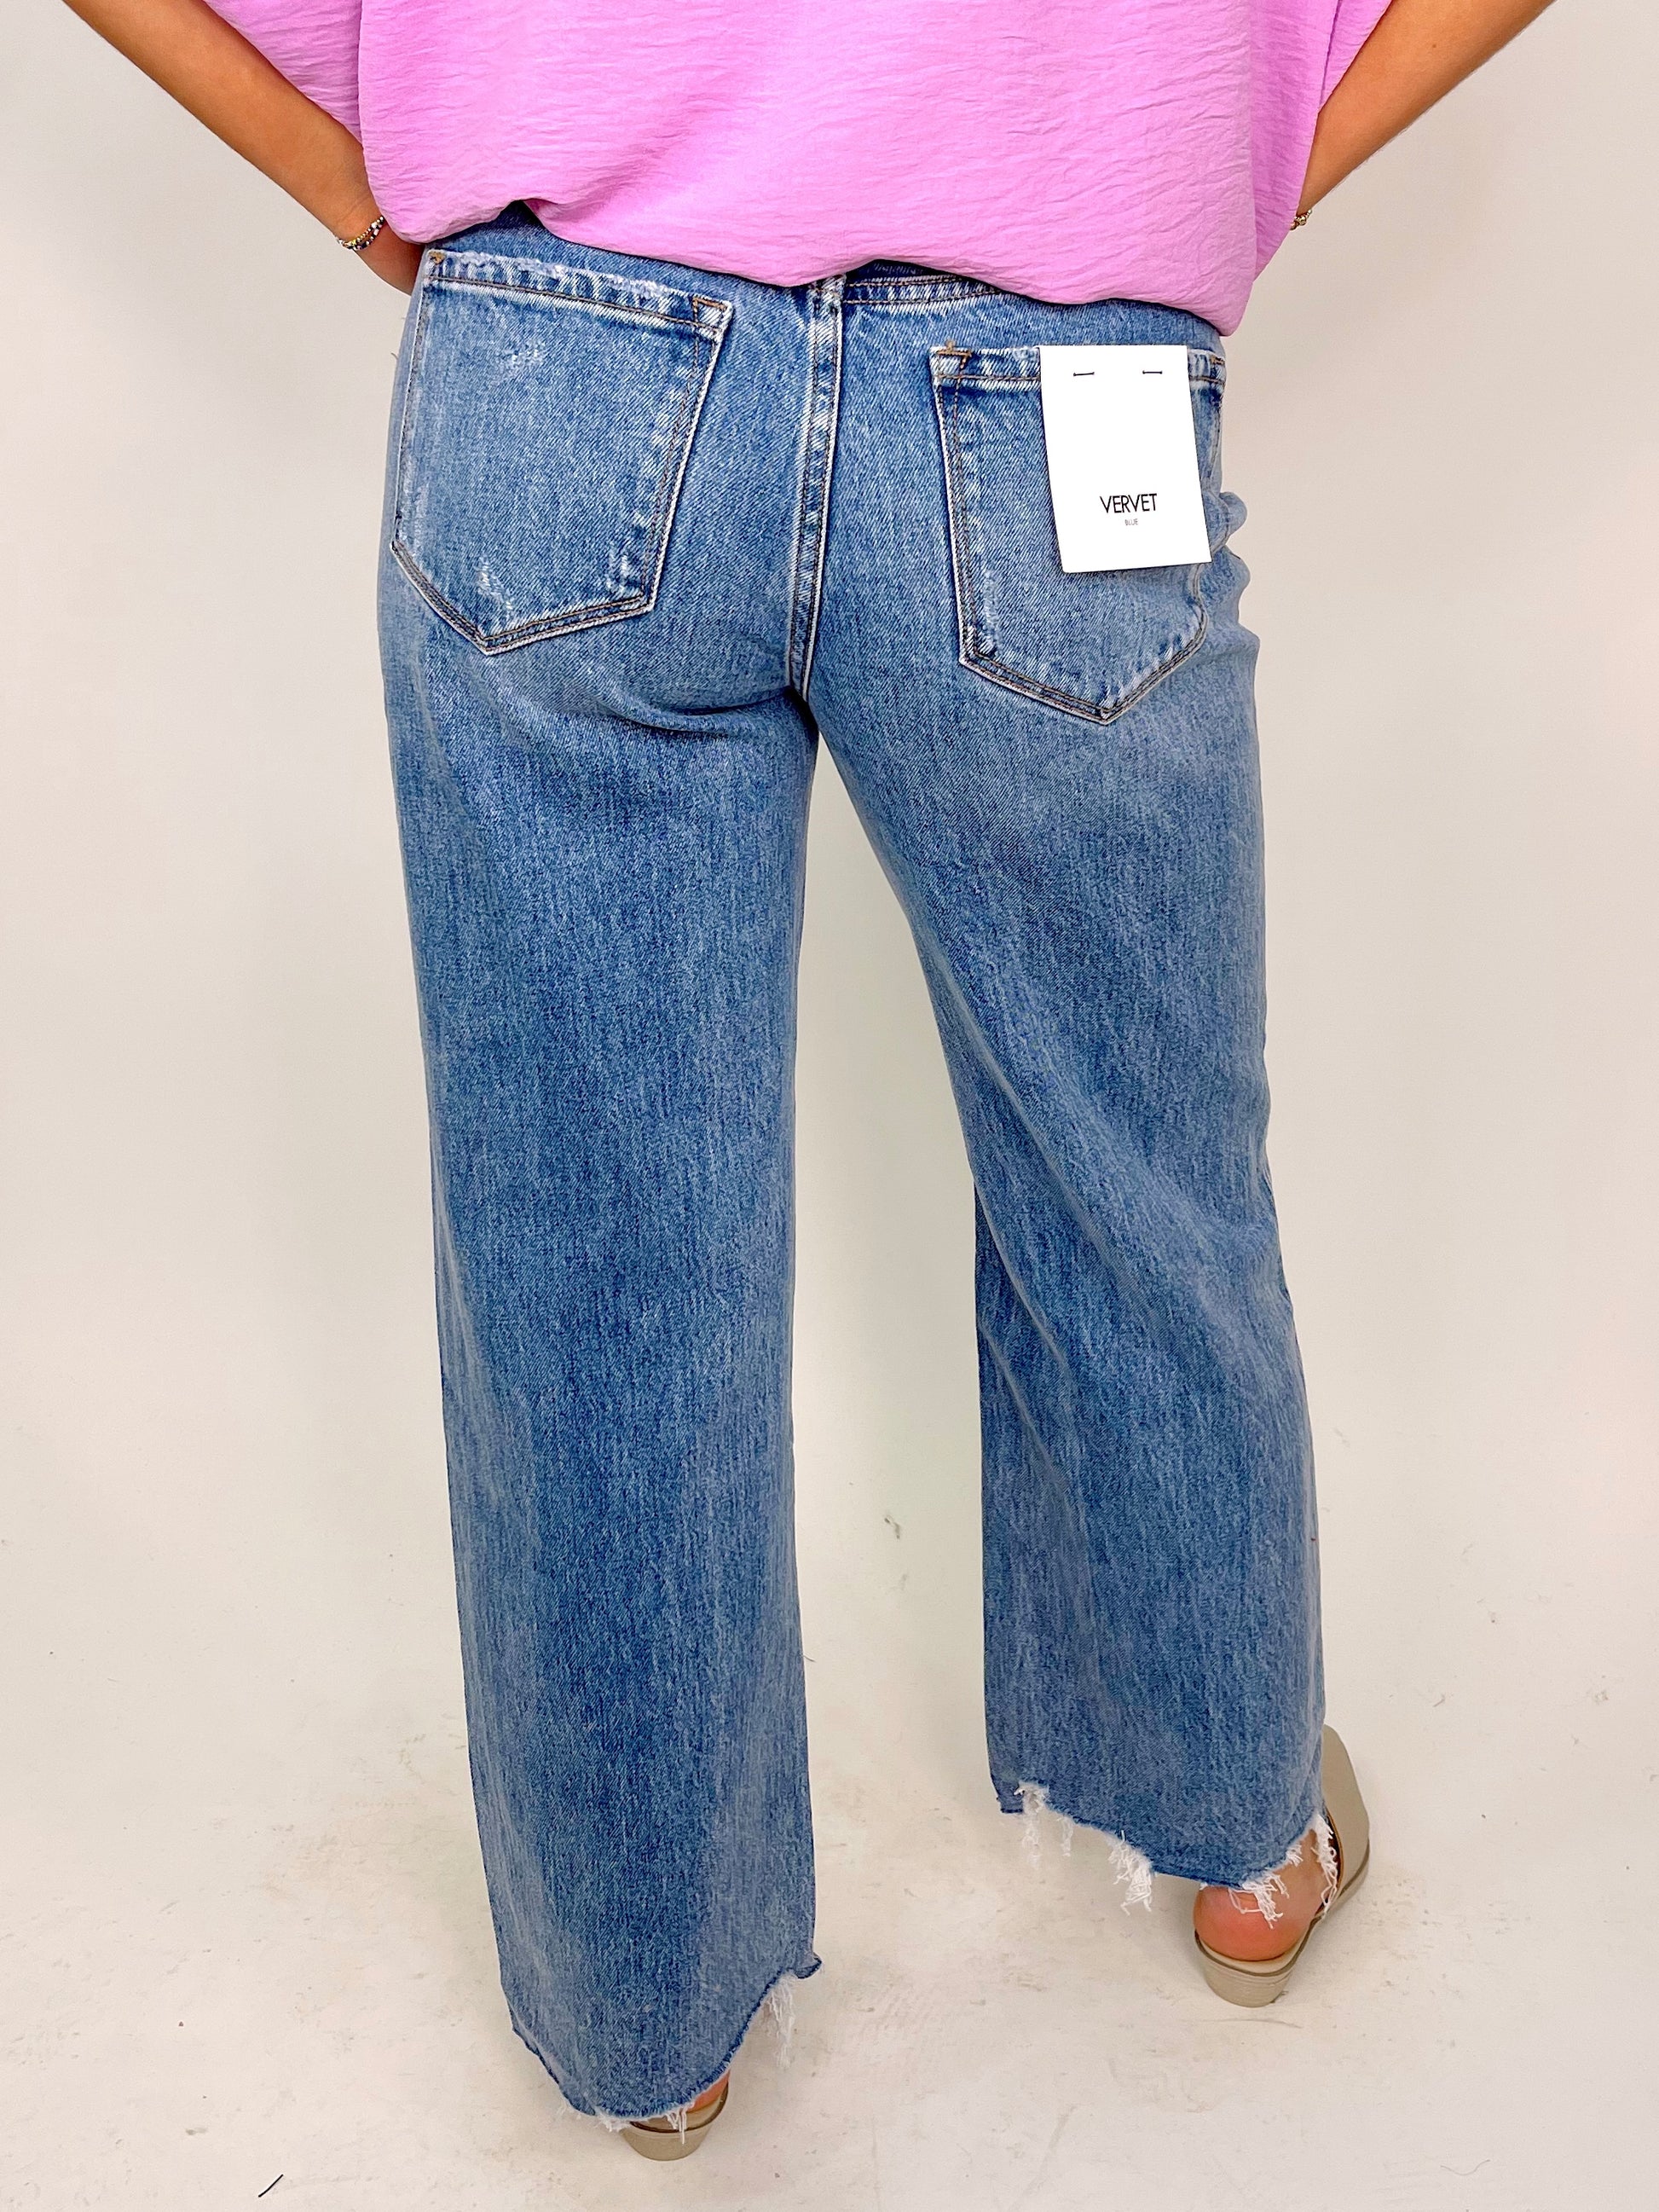 The Magnolia Crop Wide Leg Jean-Jeans-Vervet-The Village Shoppe, Women’s Fashion Boutique, Shop Online and In Store - Located in Muscle Shoals, AL.